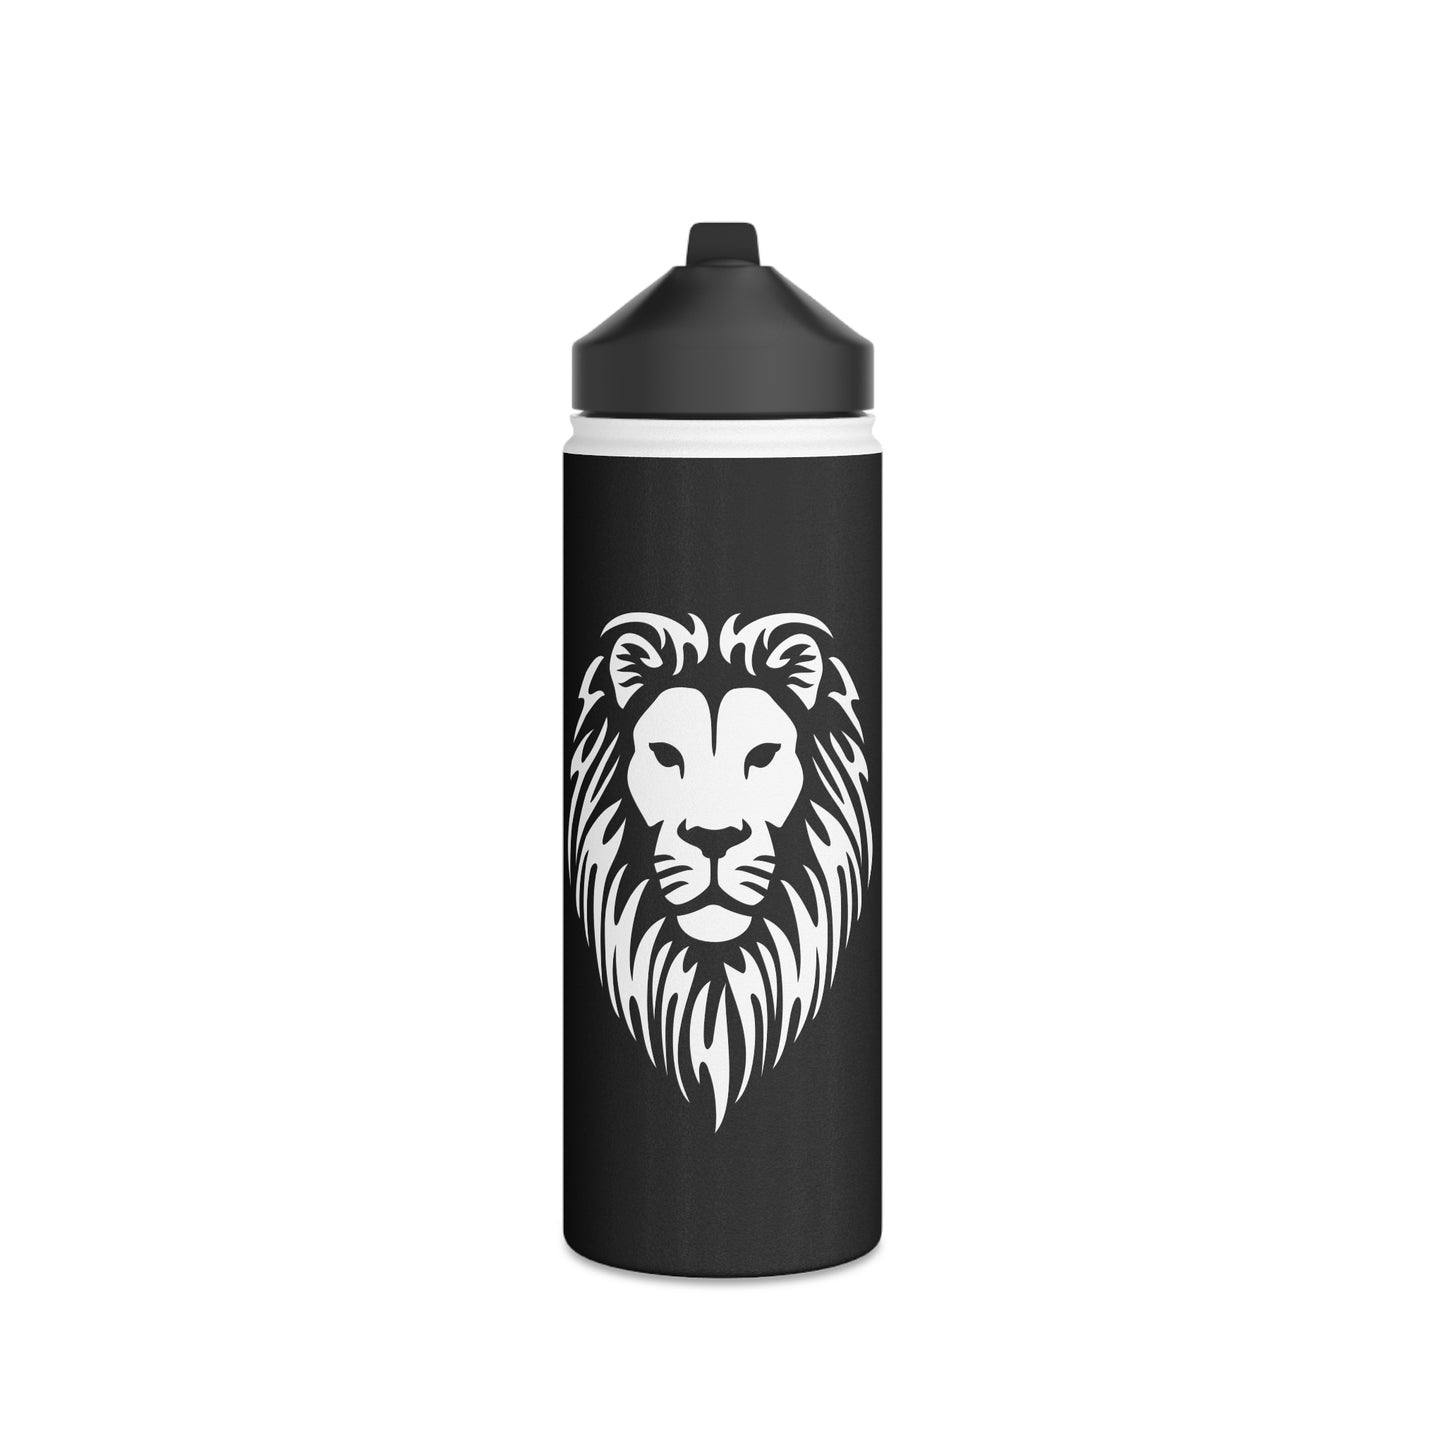 Strong & Courageous Stainless Steel Water Bottle